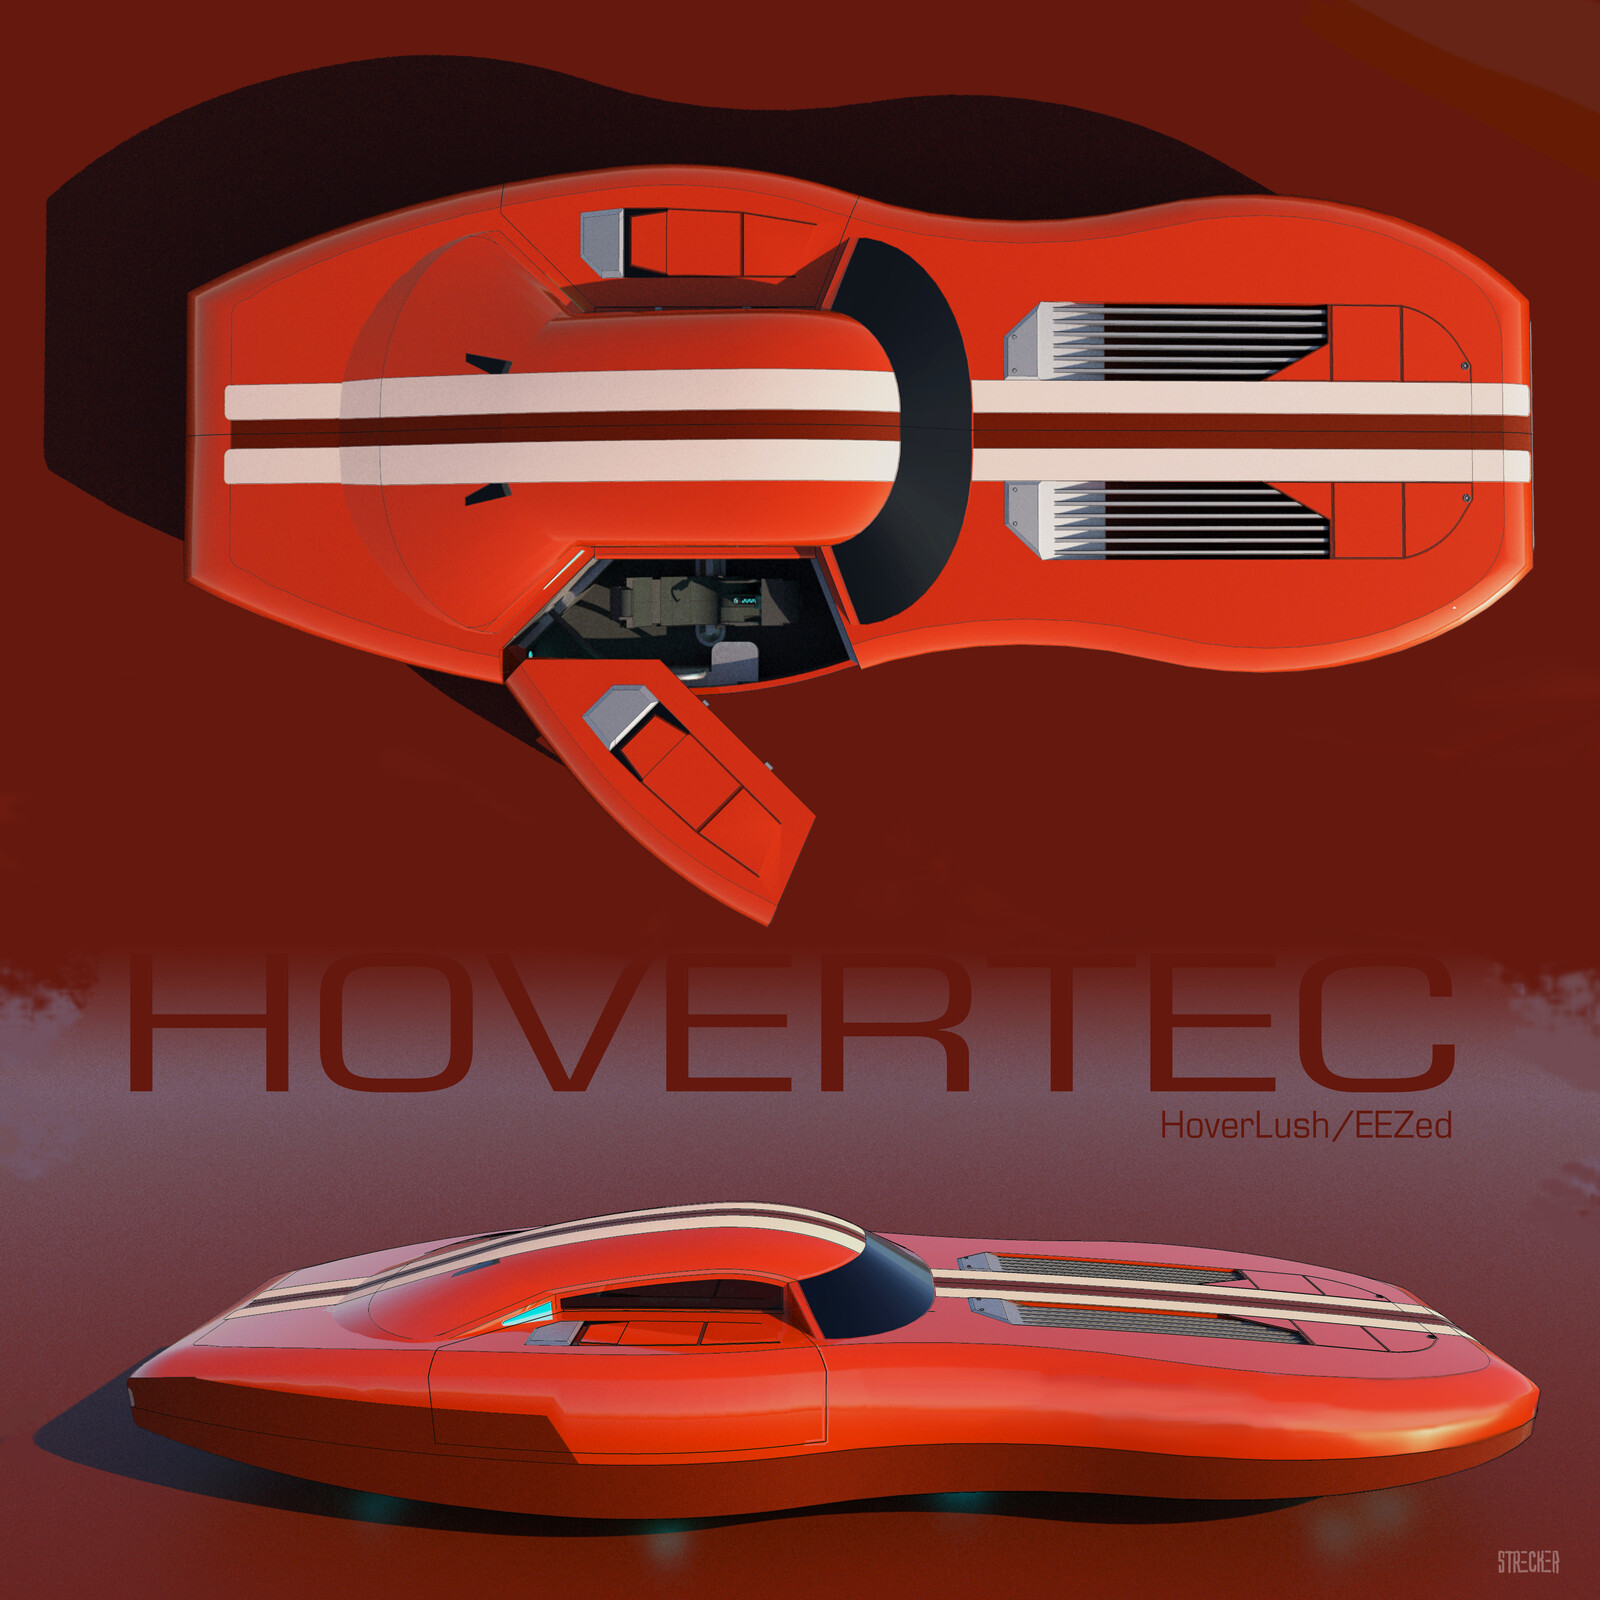 Hovertec - Hover Lush / EEZed